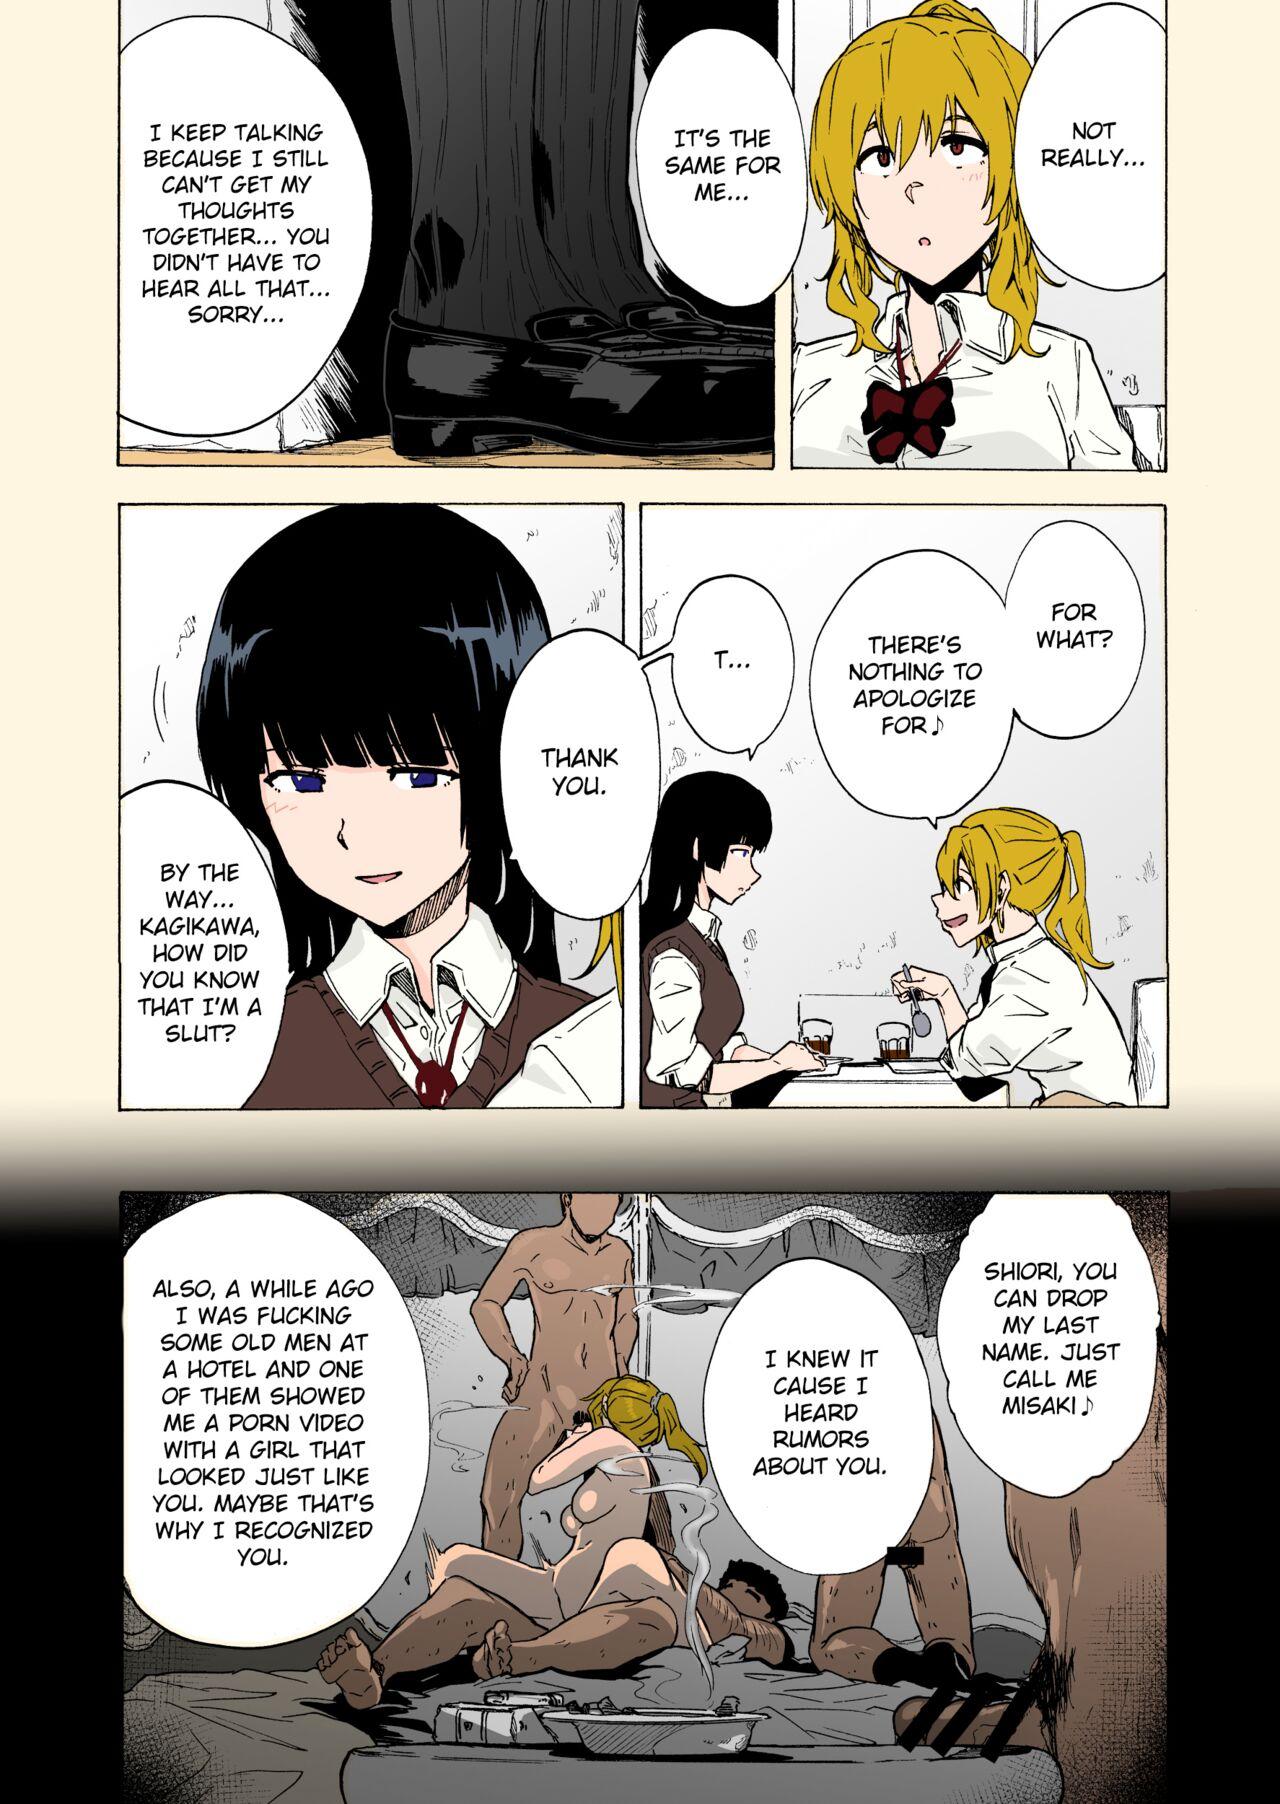 Indonesia GAME OF BITCHES 2 - Original Caiu Na Net - Page 10